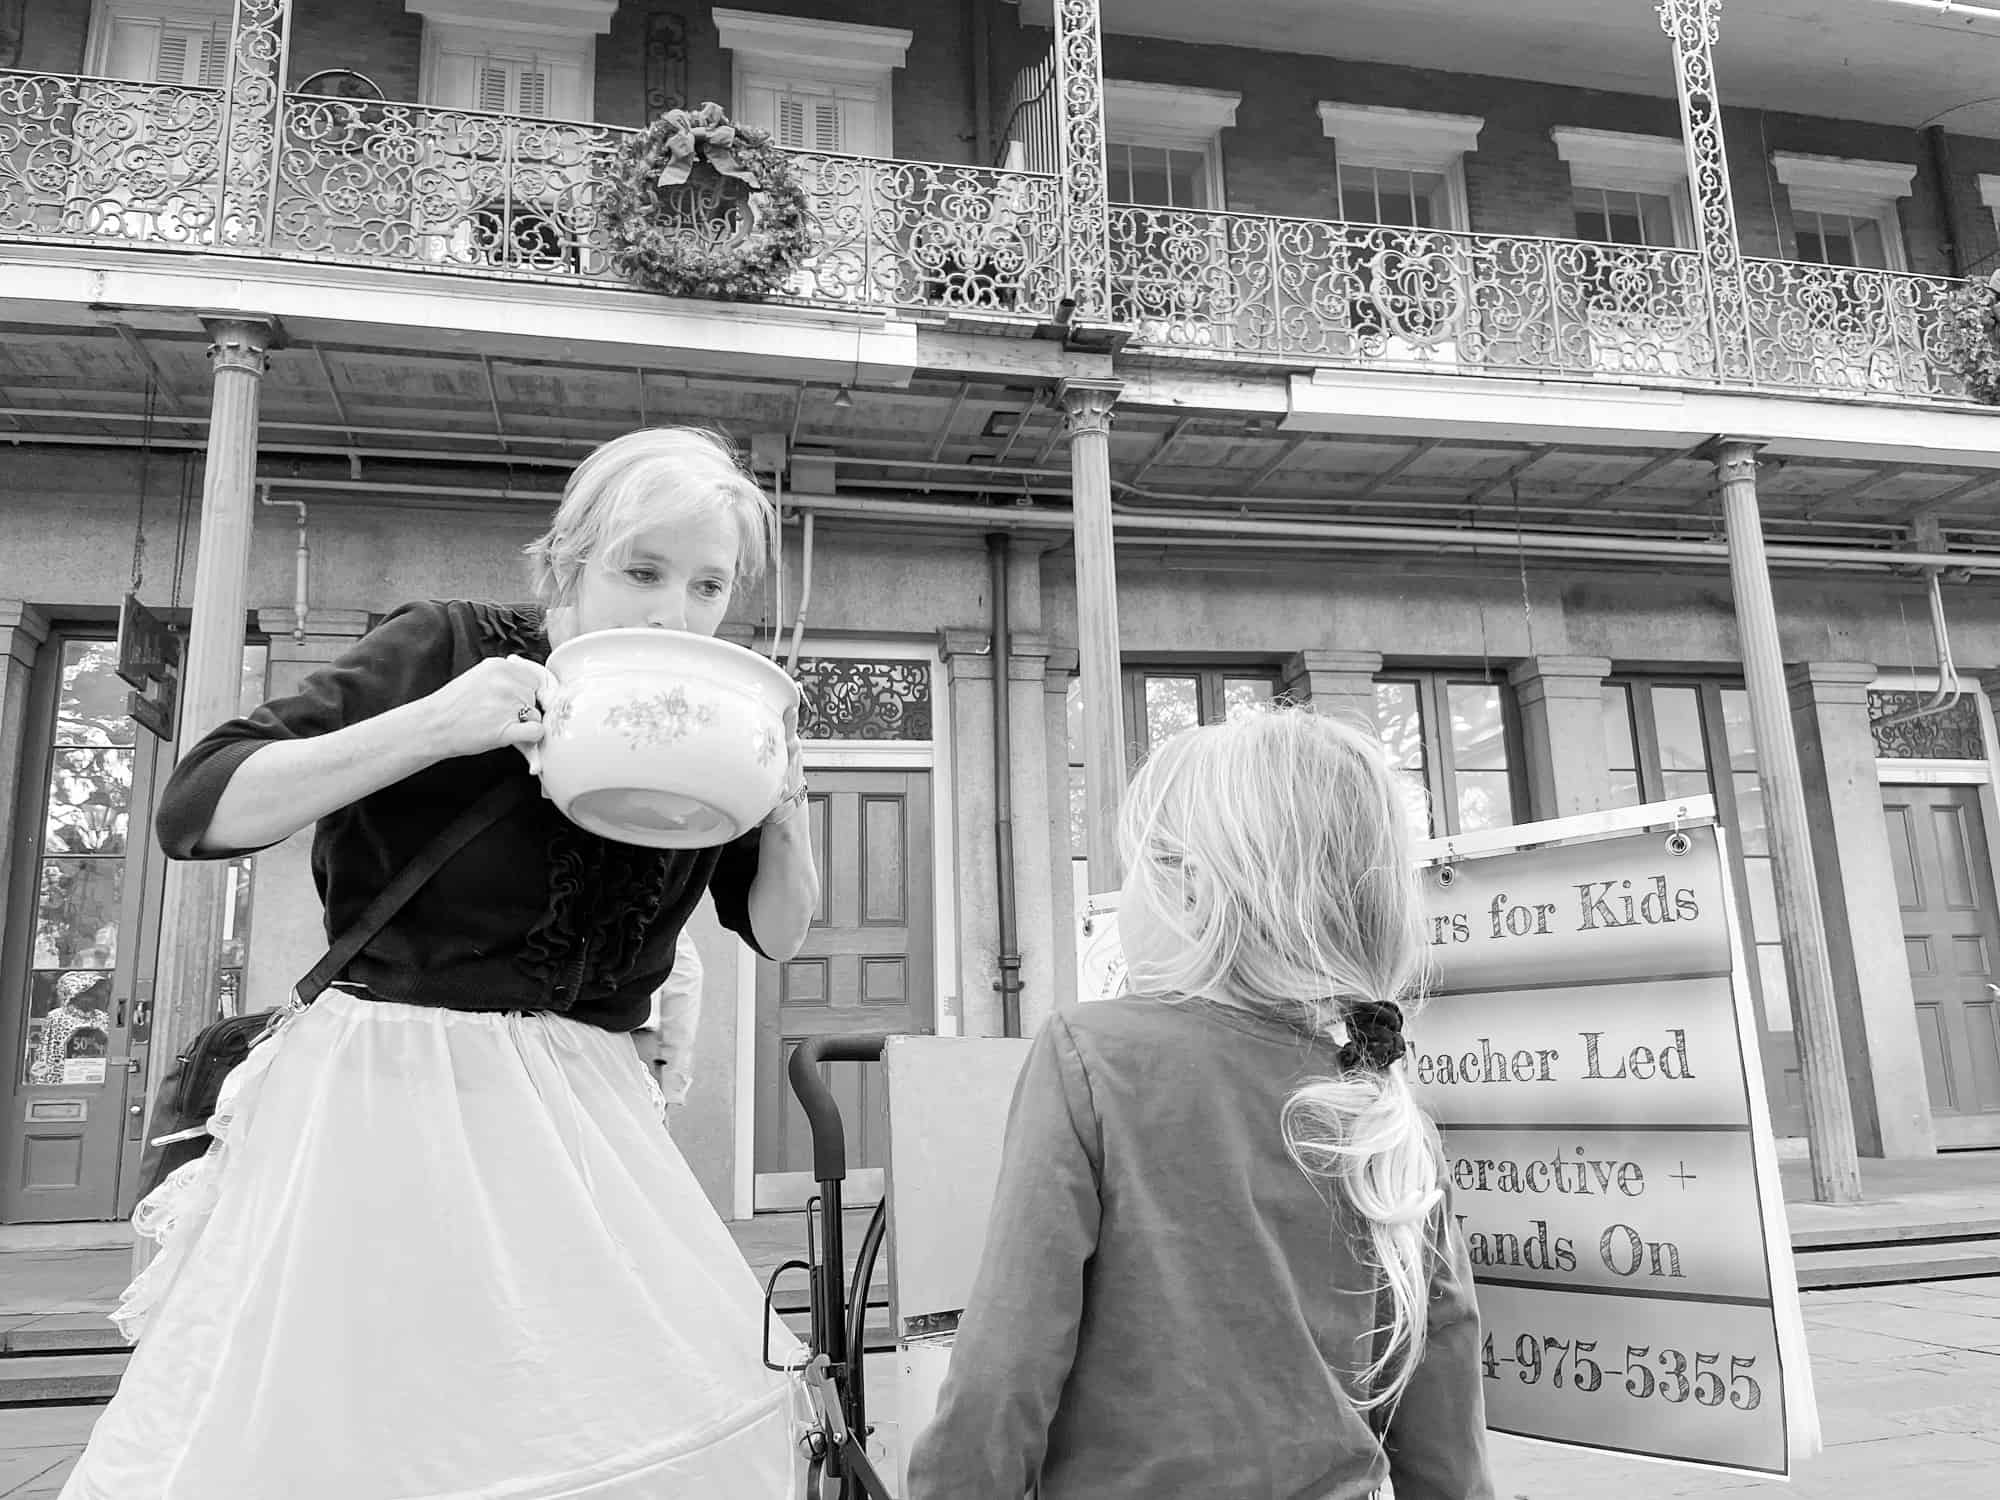 USA - New Orleans - French Quarter - Drinking from a chamber pot